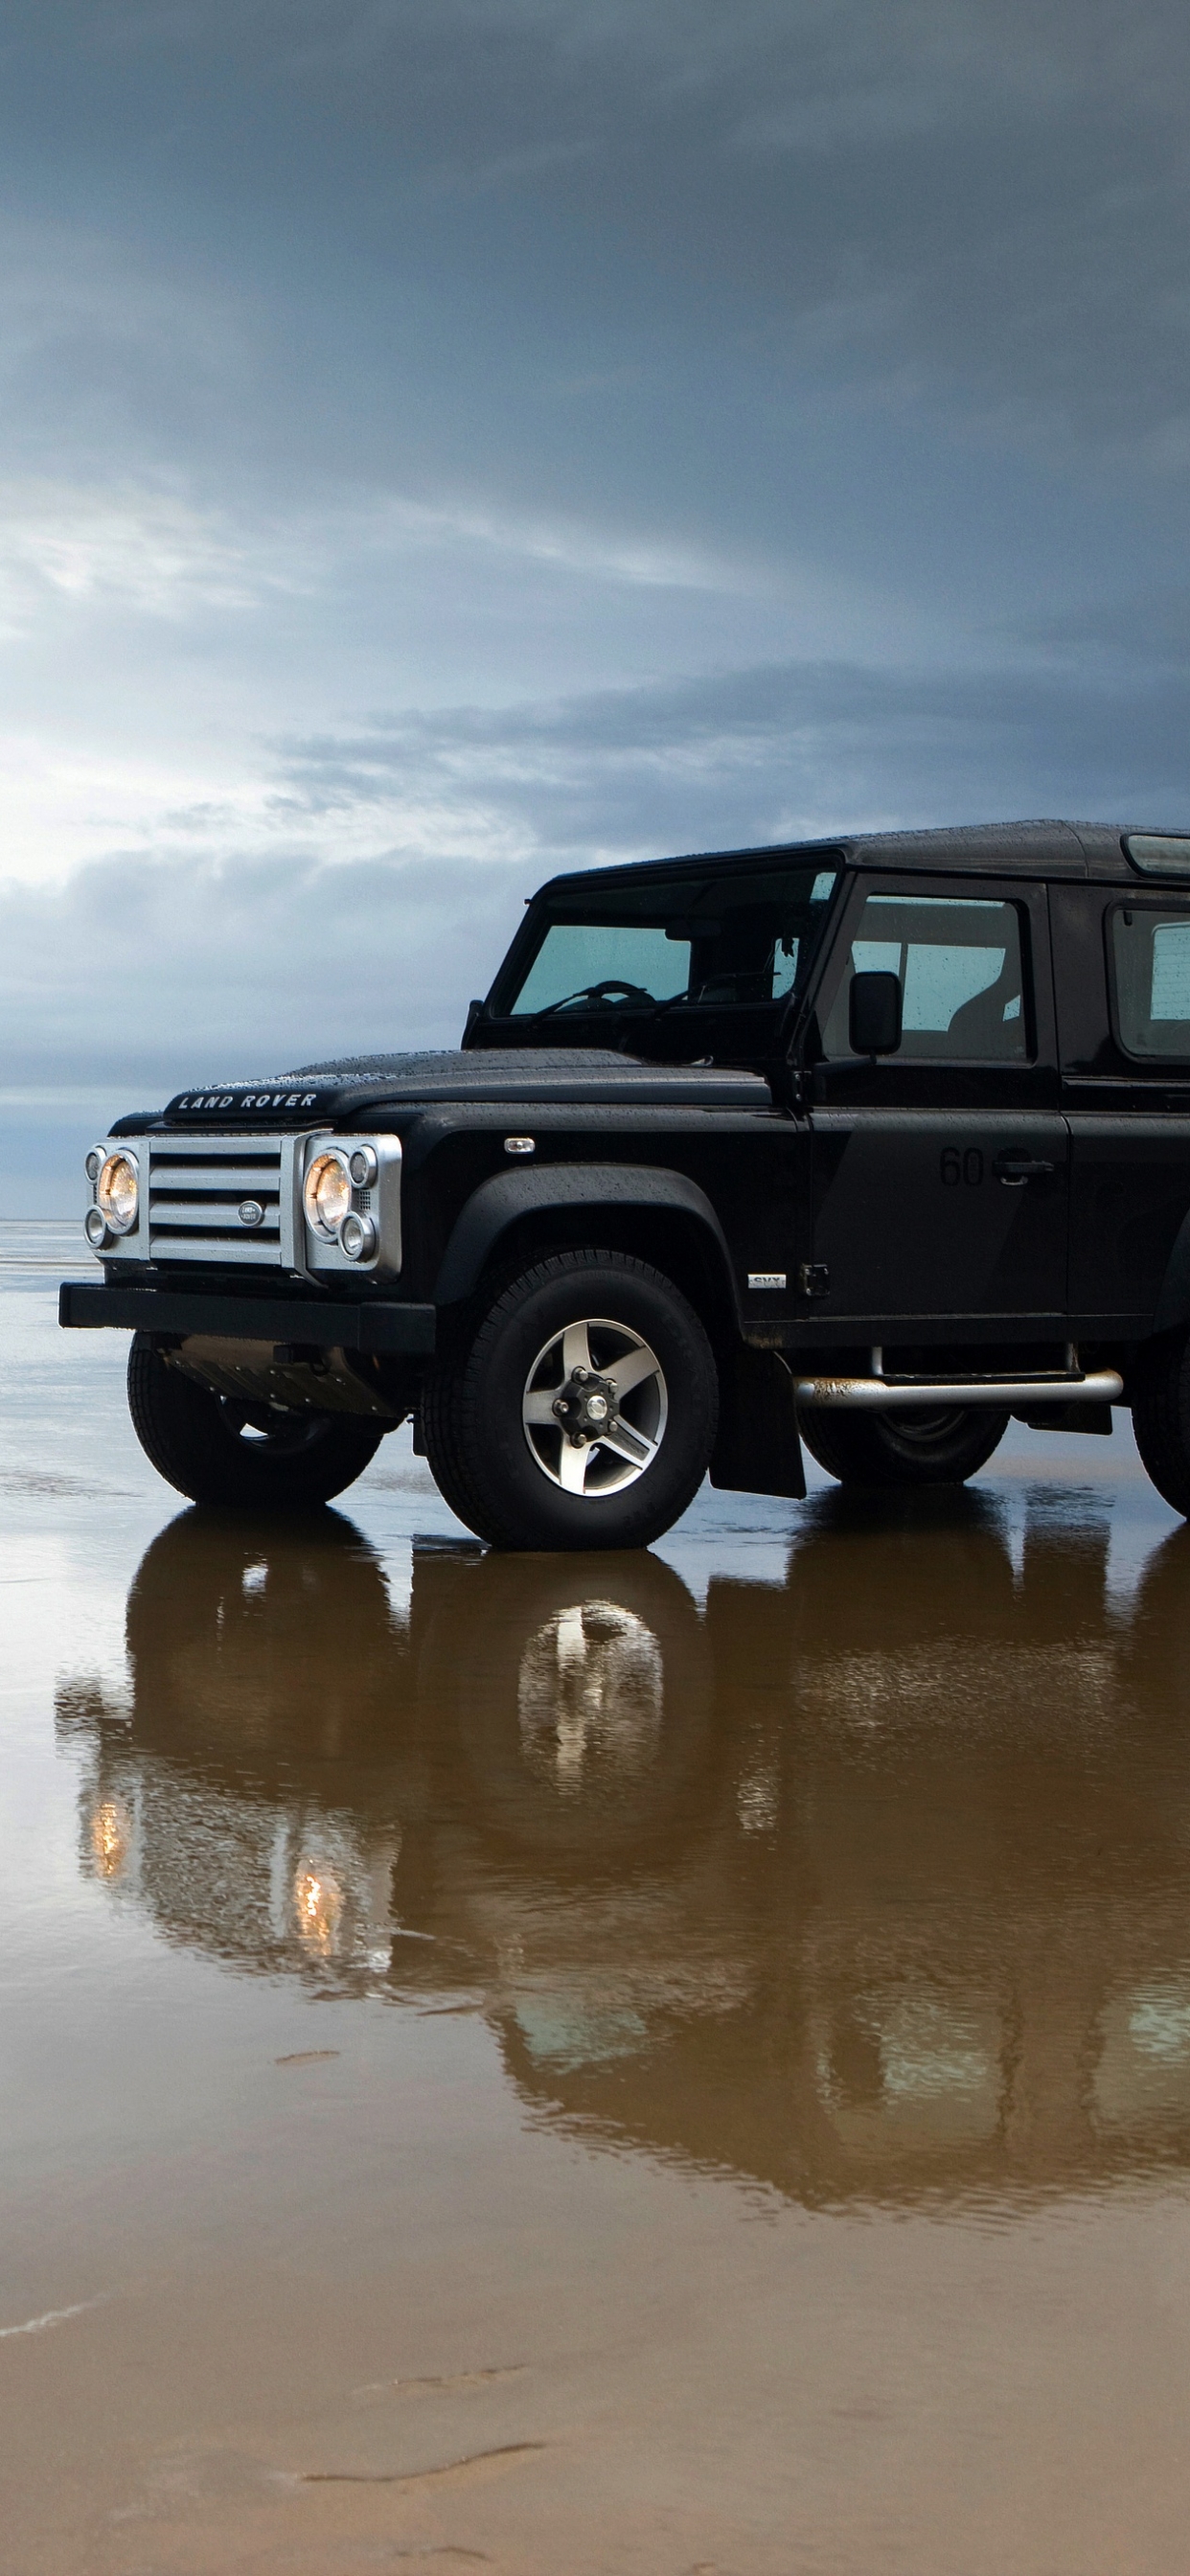 Land Rover Defender on the Beach